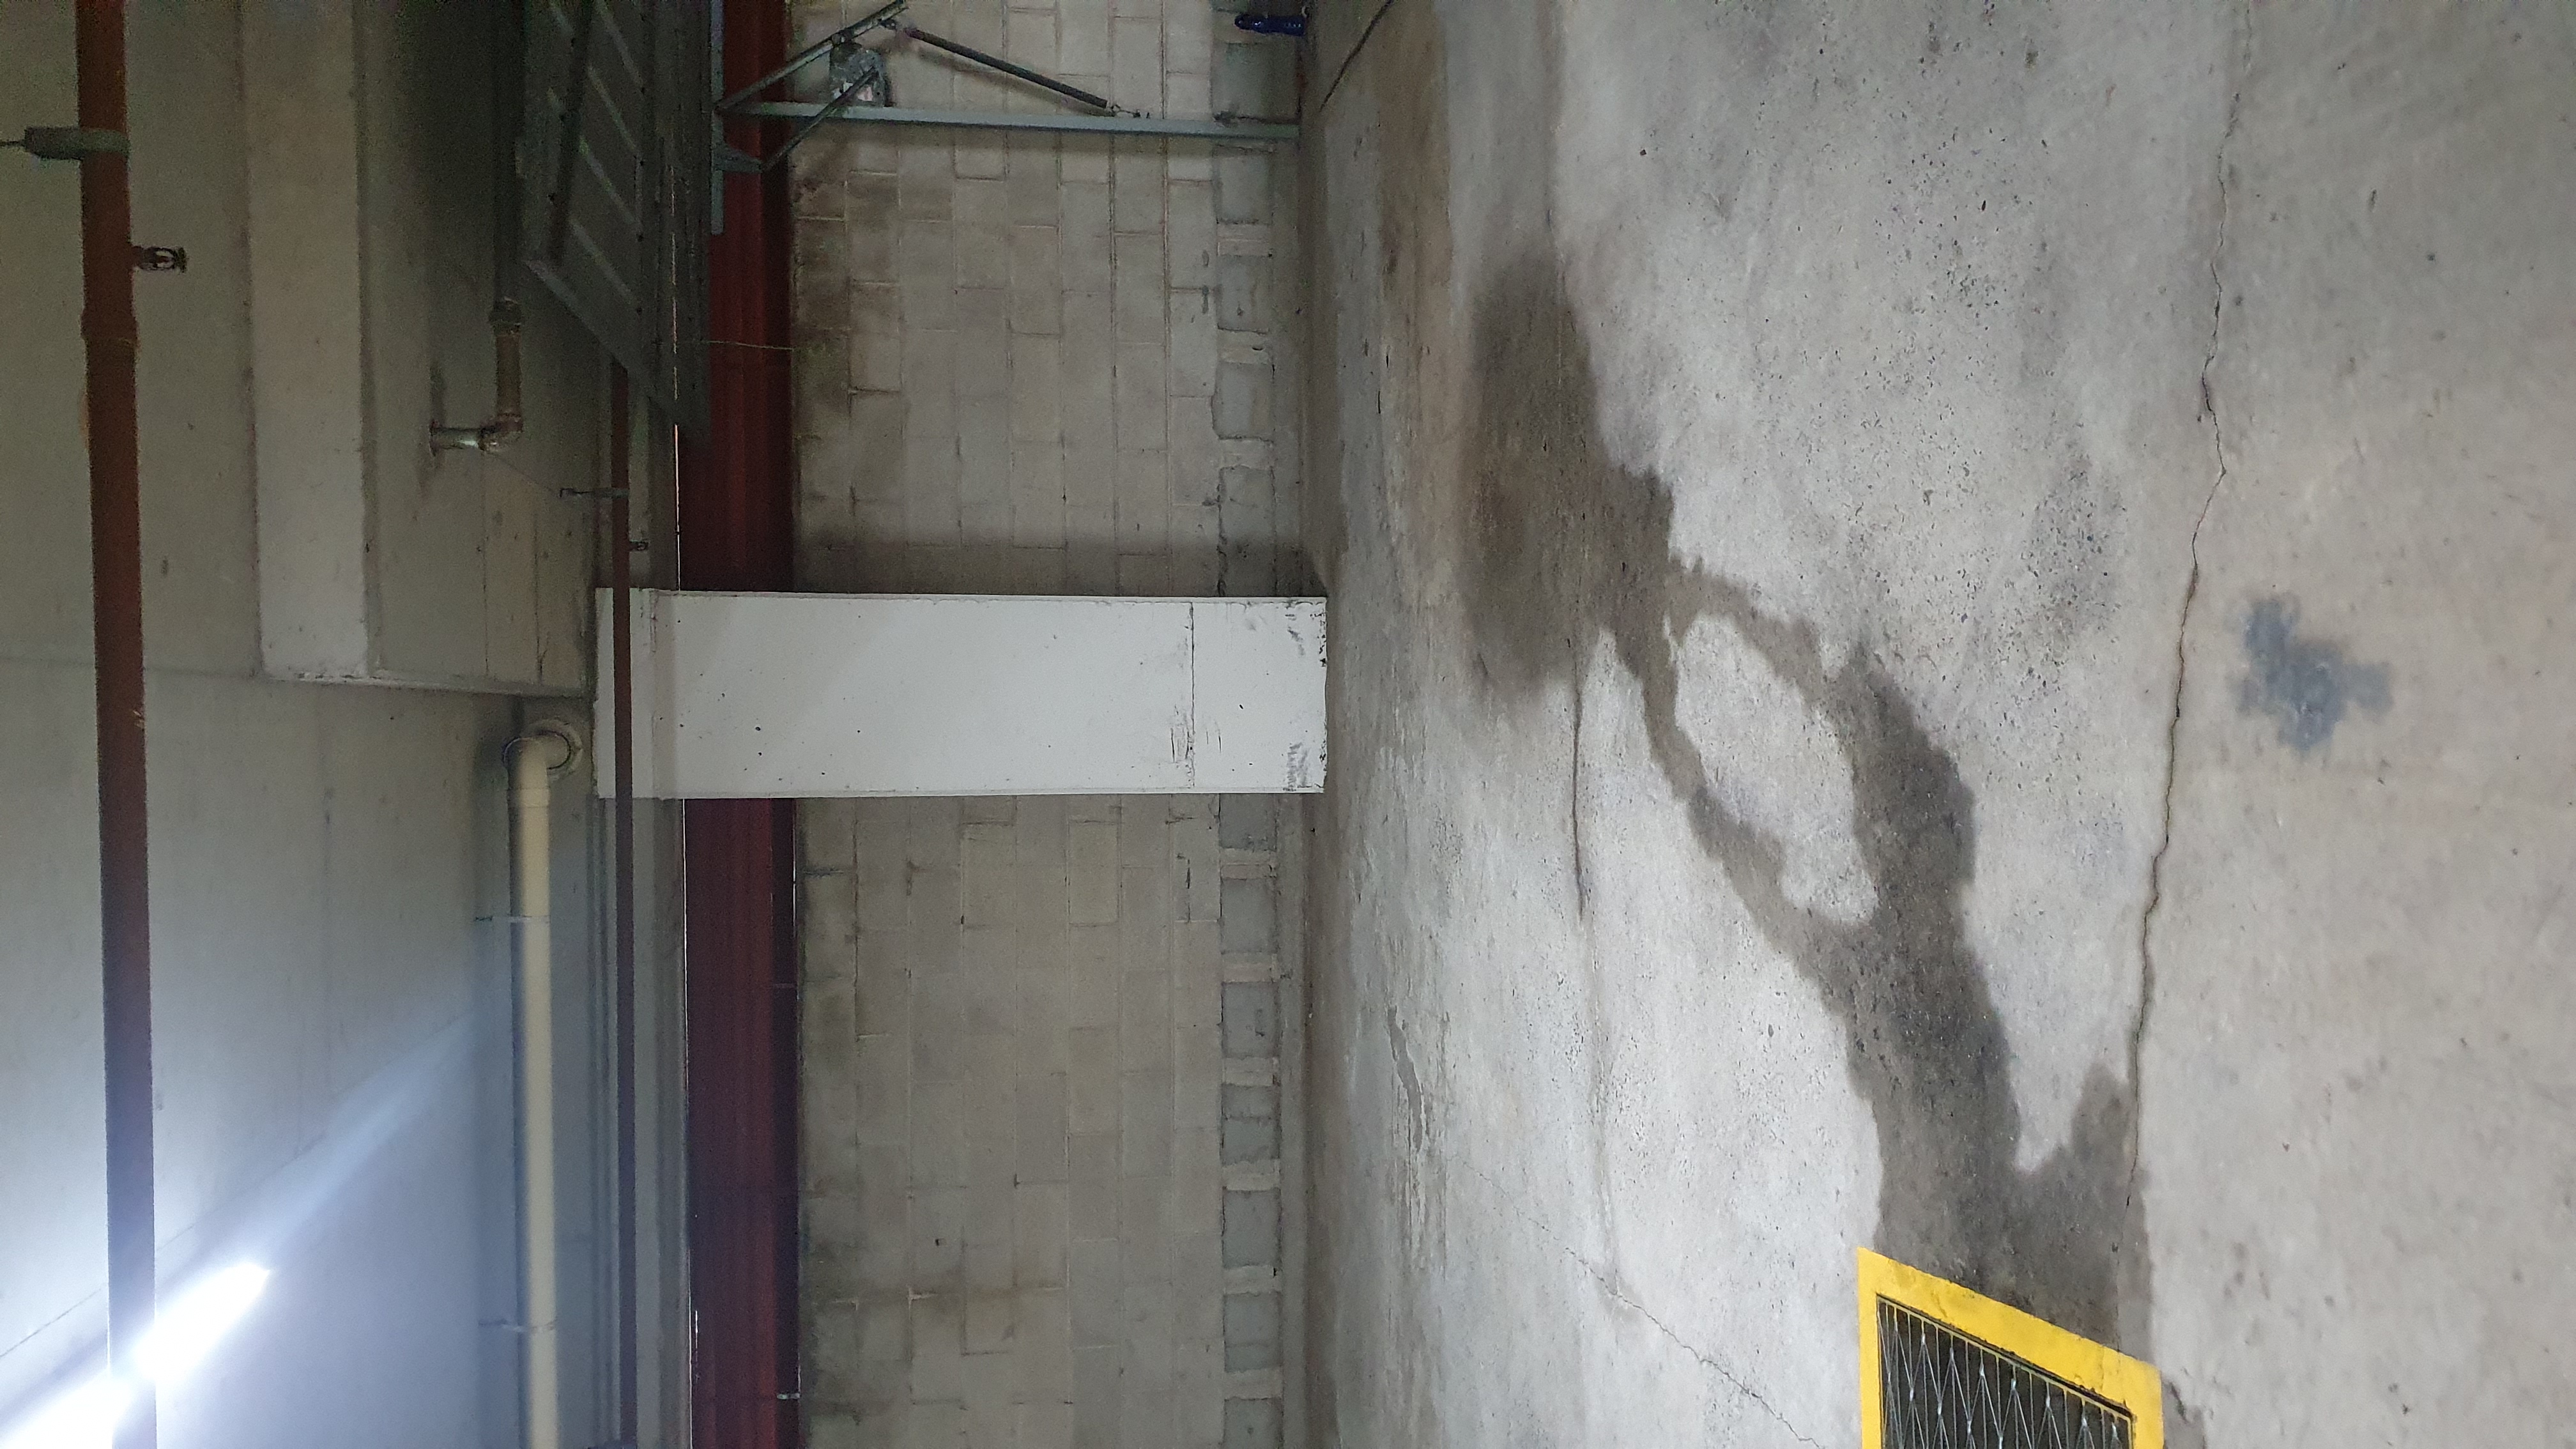 SP52948-examples-of-water-leakages-in-basement-and-garages-photo-3-22Feb2022.jpg